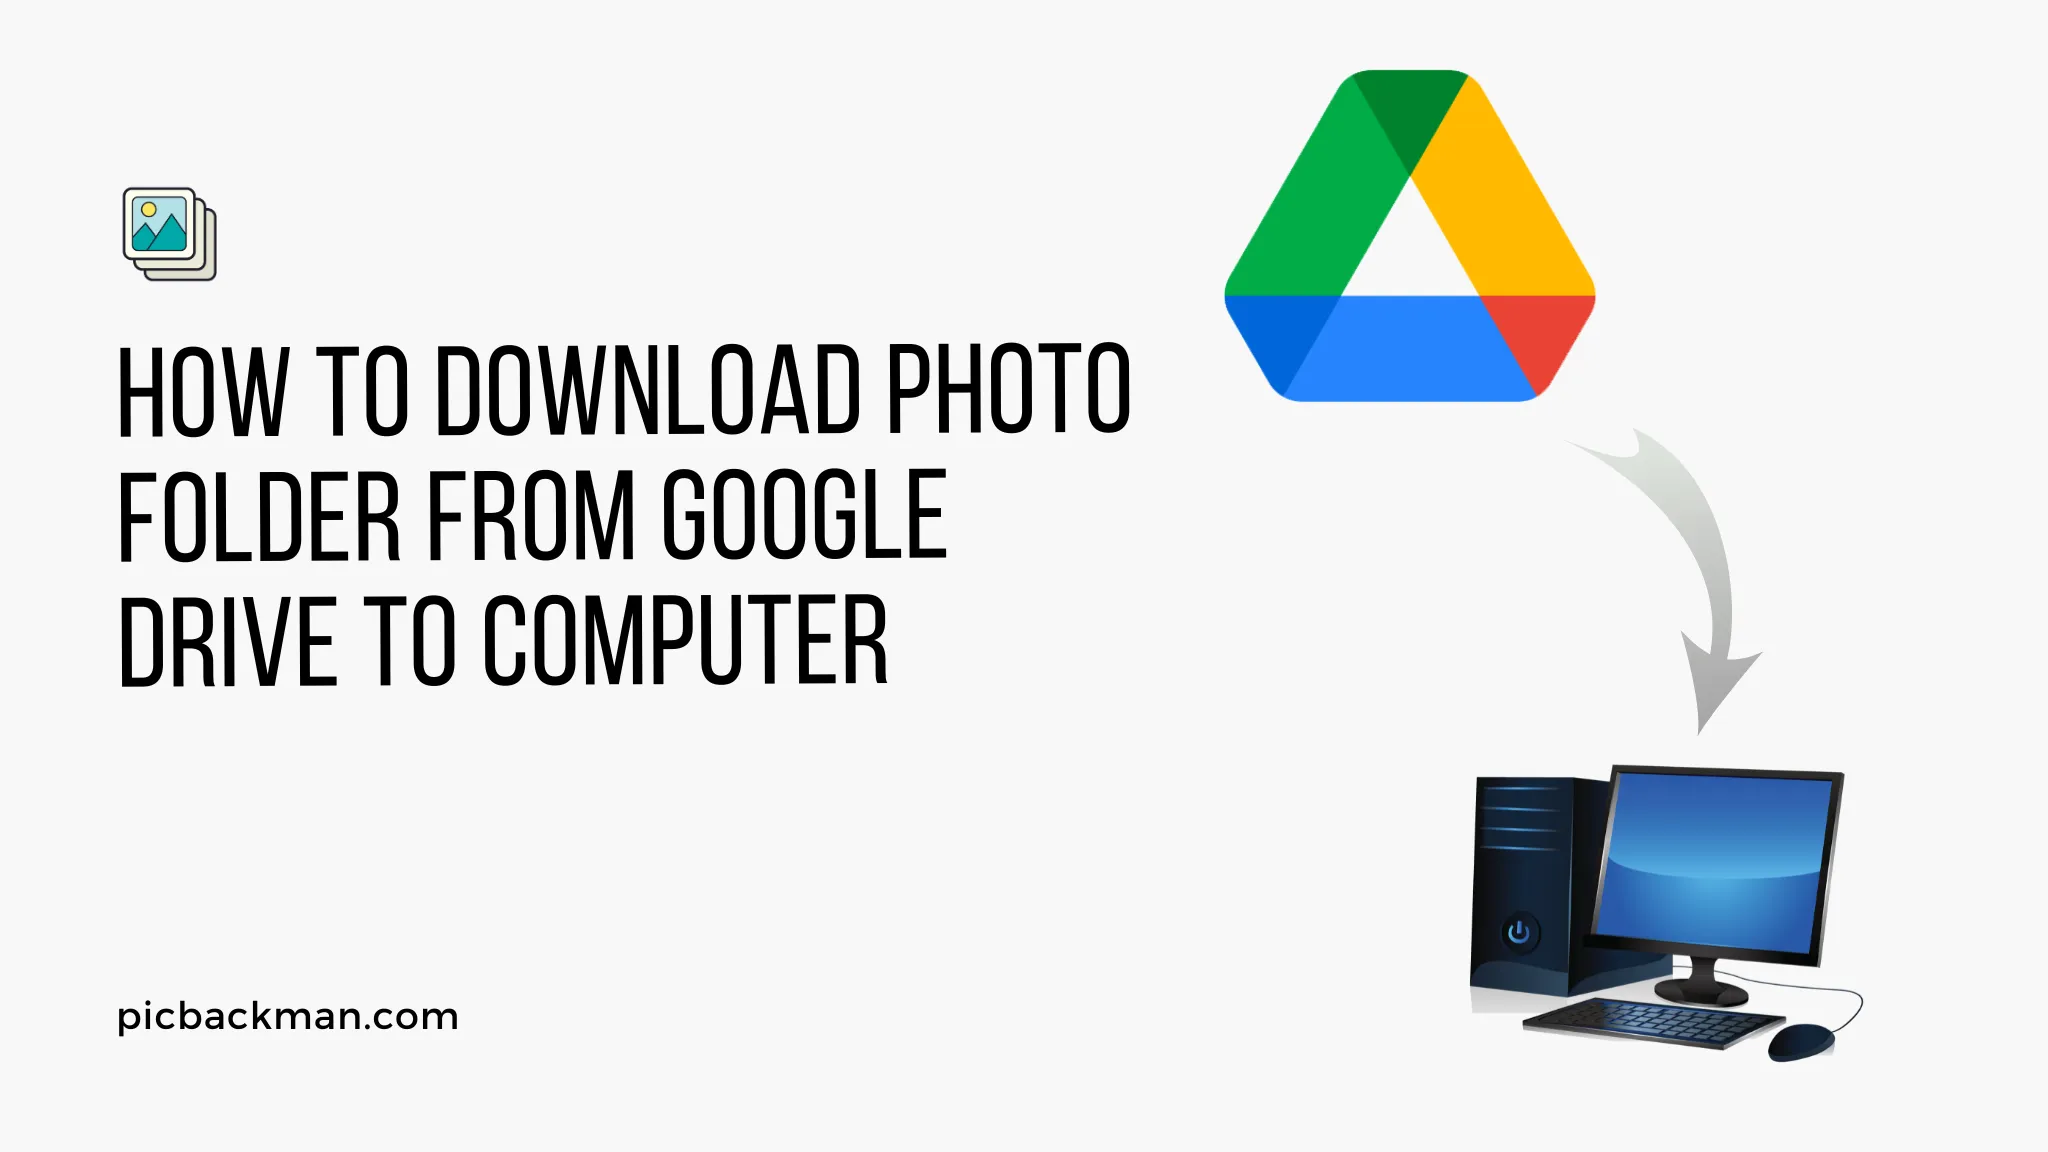 How to Download Photo folder from Google Drive to Computer